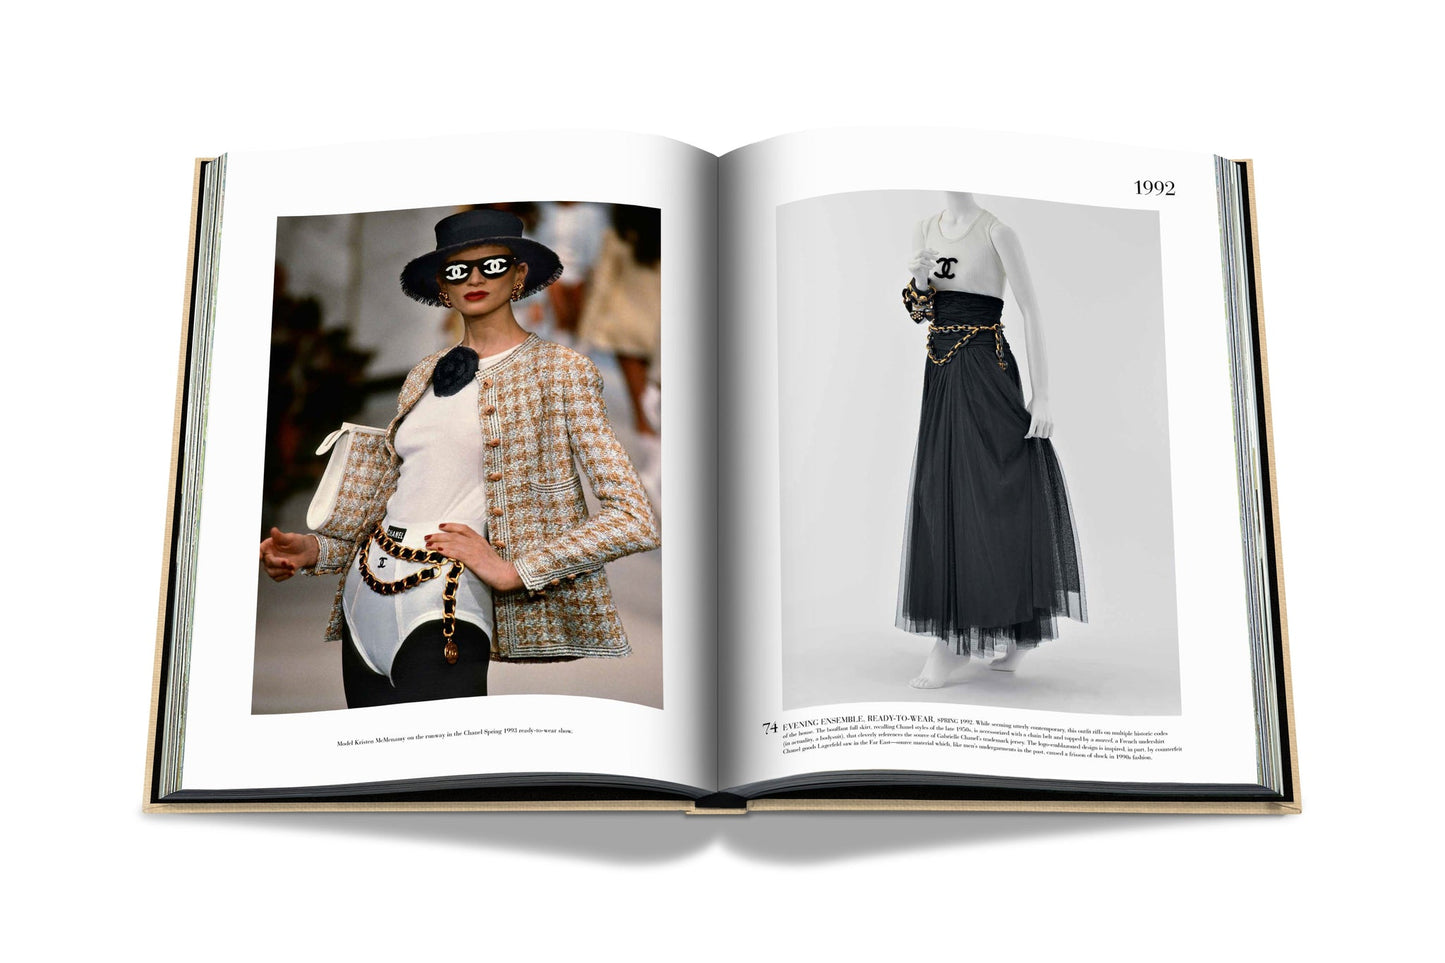 Chanel Catwalk The Complete Collection Hardcover book by Patrick Mauriés  and Adélia Sabatini  Catchcomau